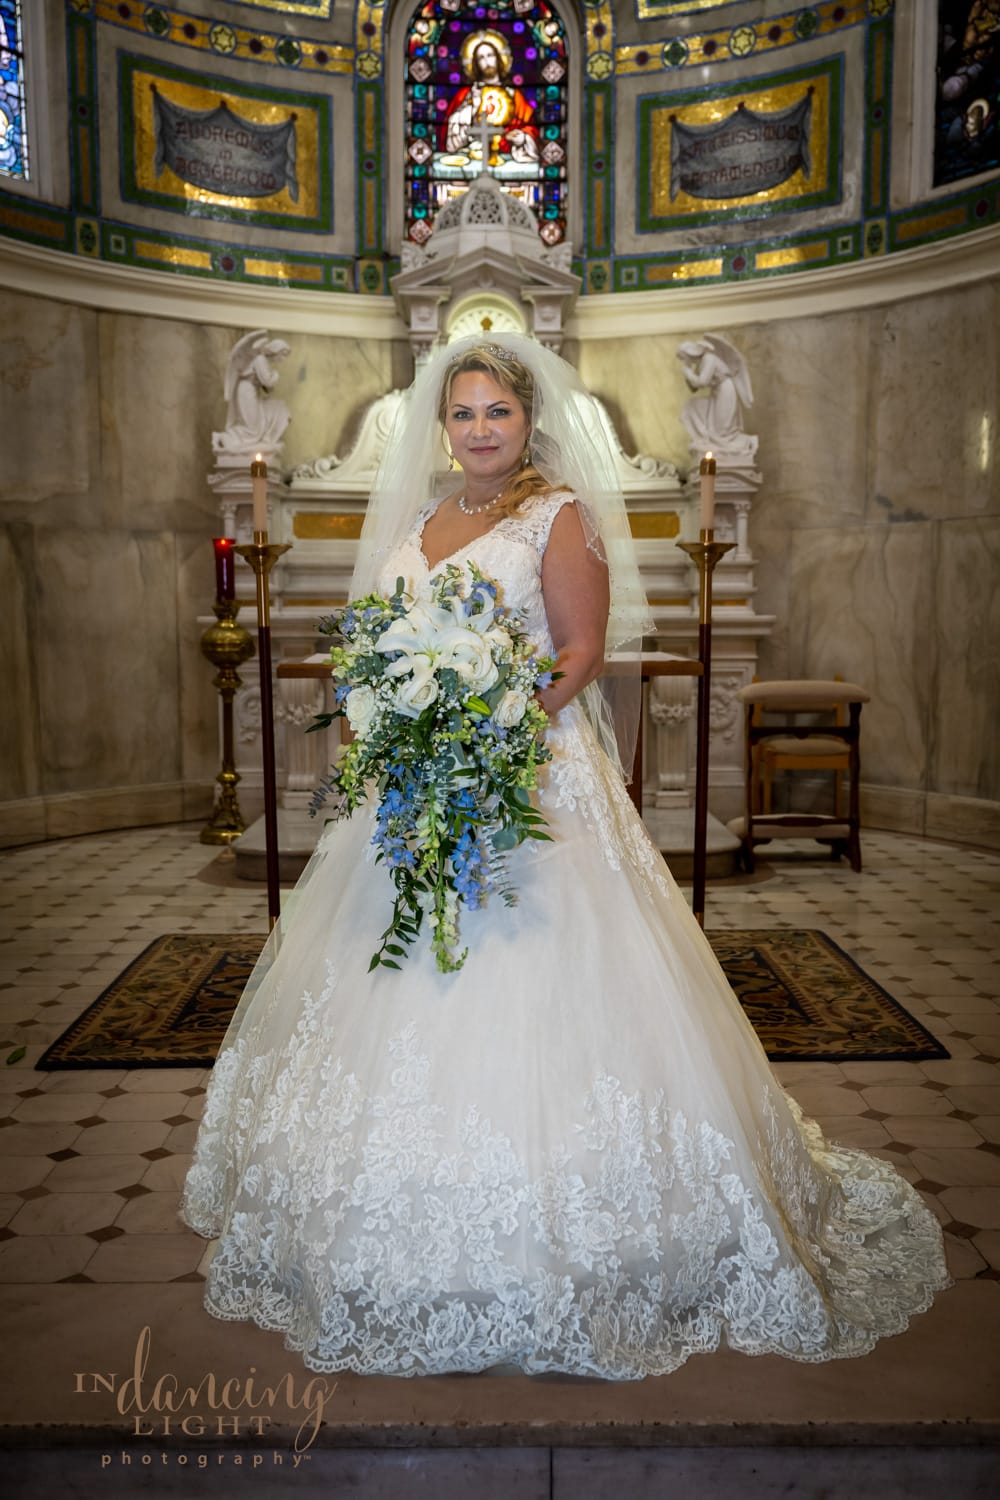 Bride stands facing at the front of the chapel following her wedding in the Indianapolis Cathedral. The alter and stained glass windows are in the background.